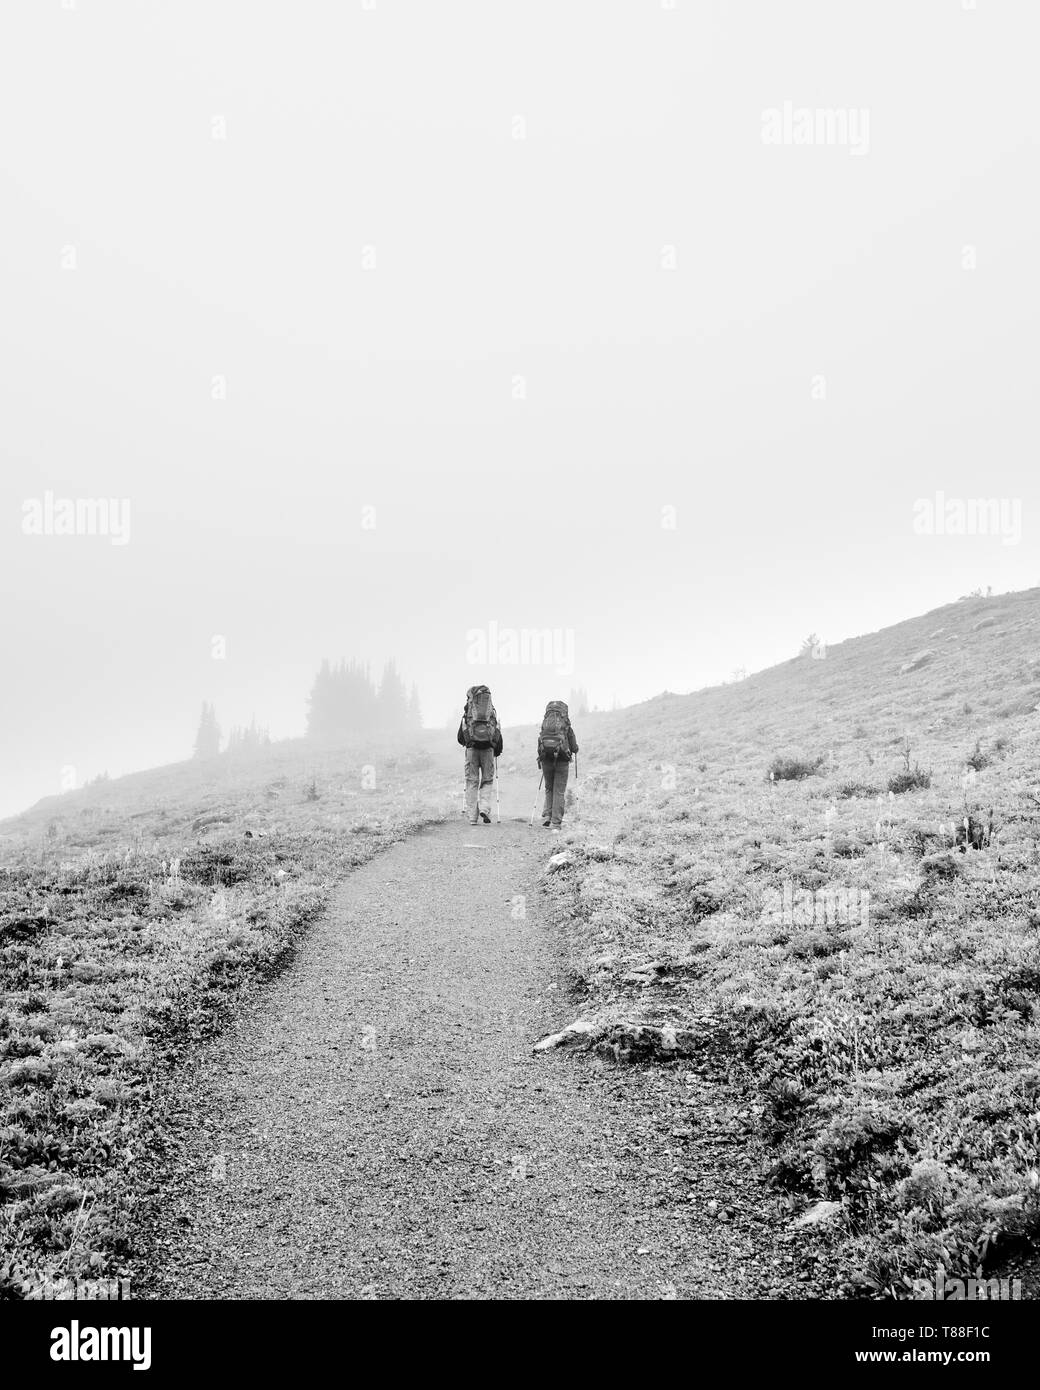 At 7500 feet a misty path leads two walkers through into the mountains & beyond at Sunshine Meadows. Stock Photo